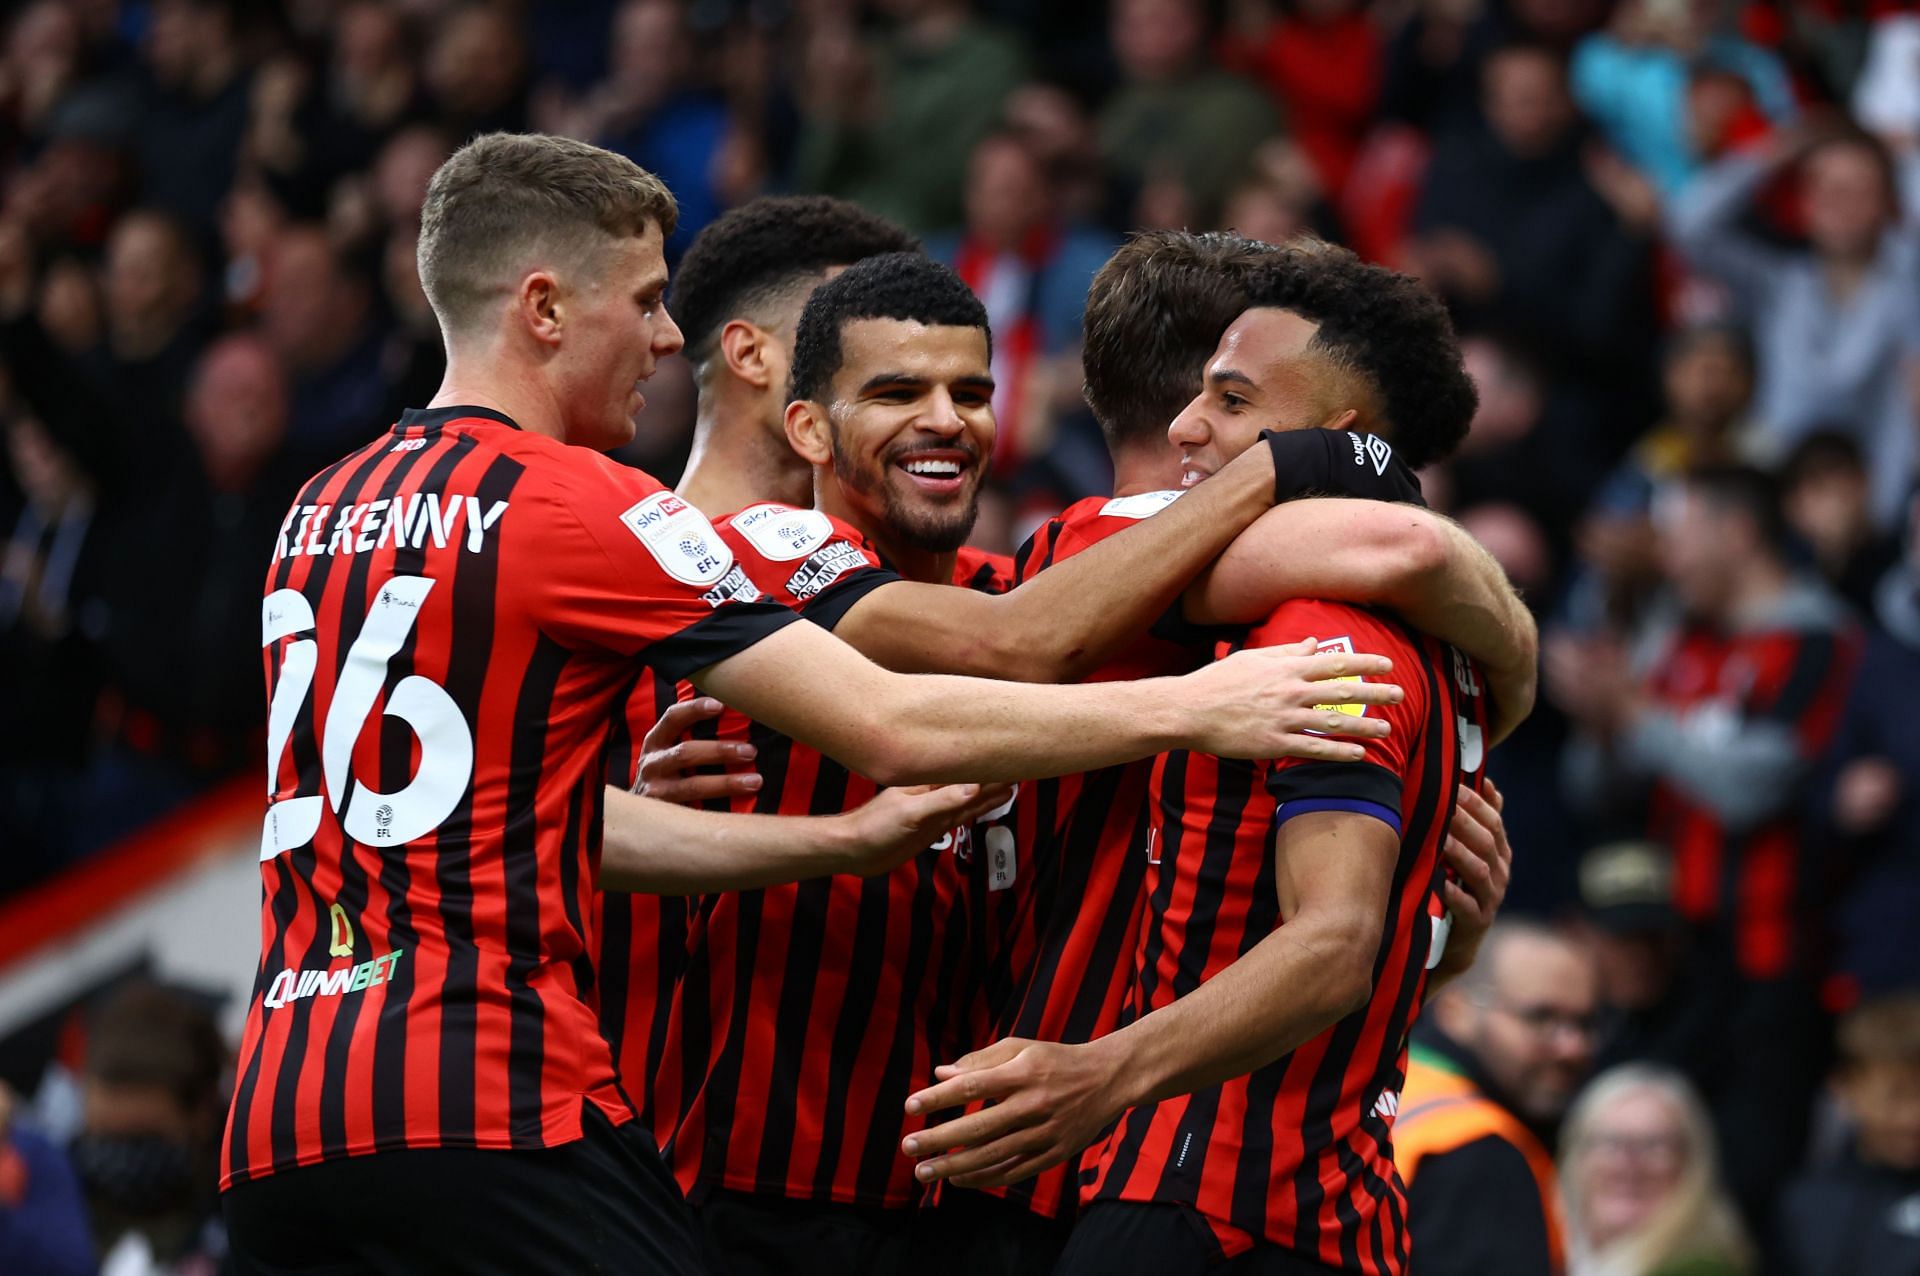 AFC Bournemouth will host Swansea City on Saturday